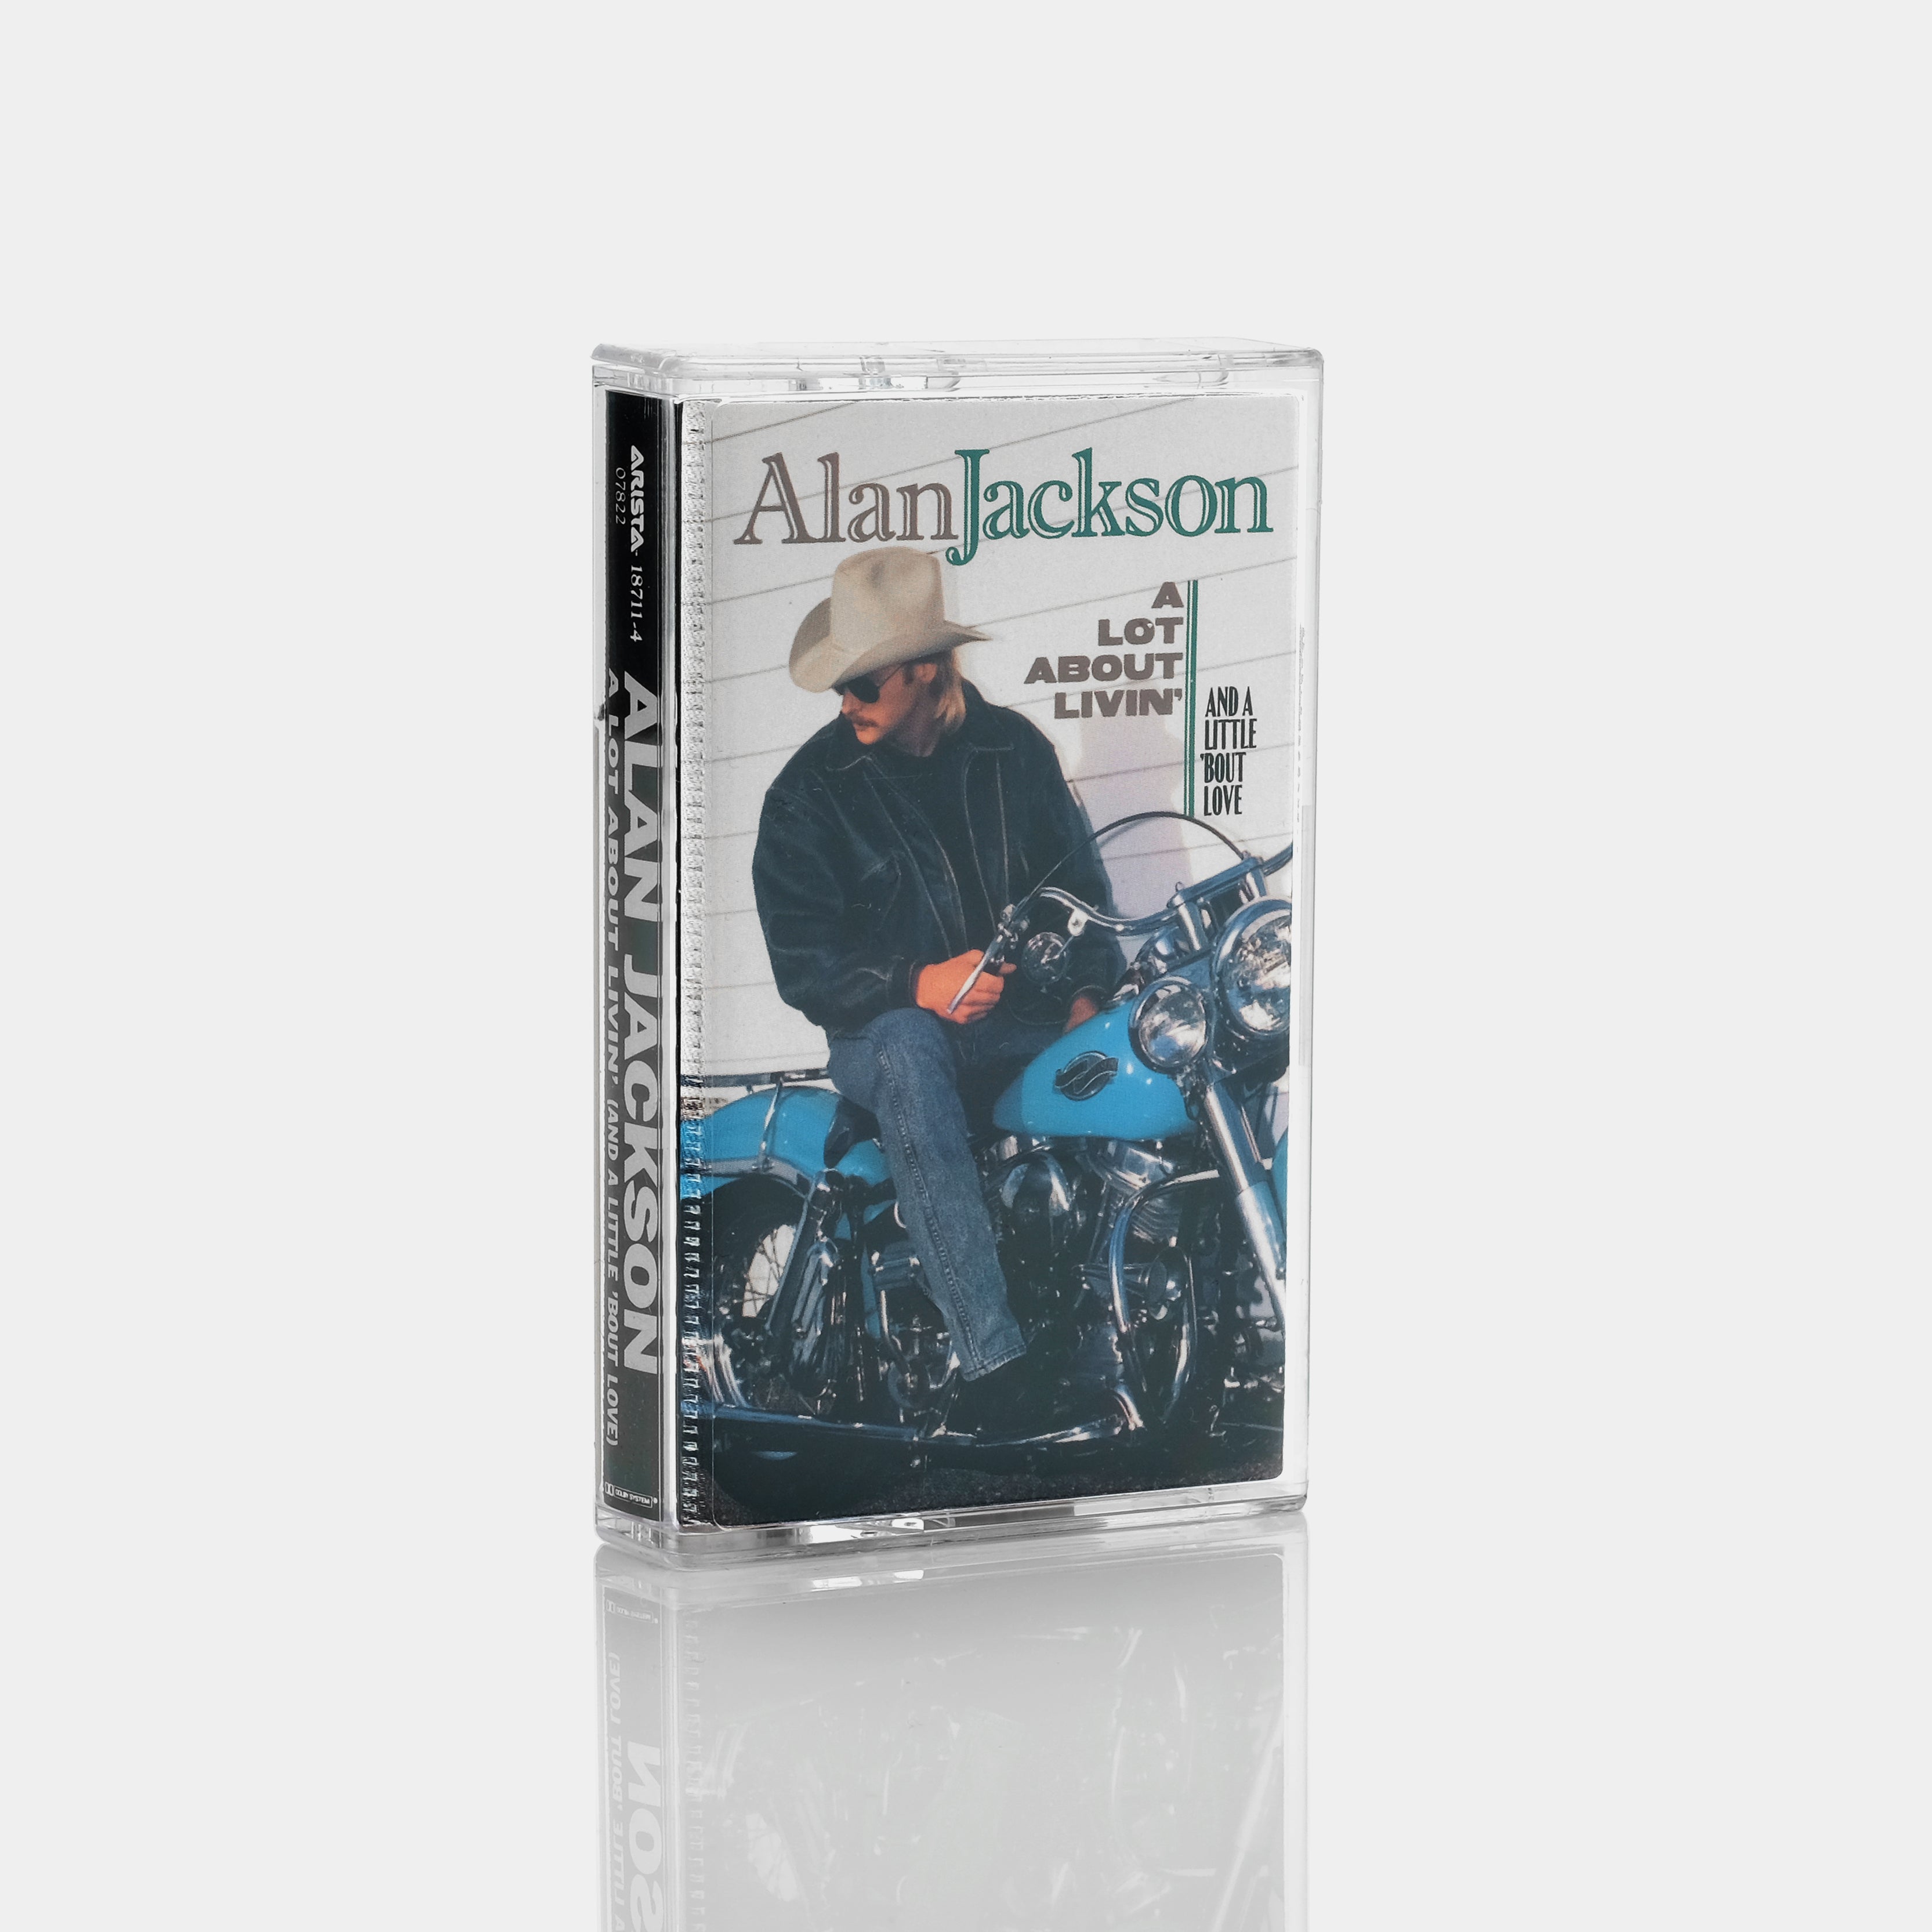 Alan Jackson - A Lot About Livin' (And A Little 'Bout Love) Cassette Tape